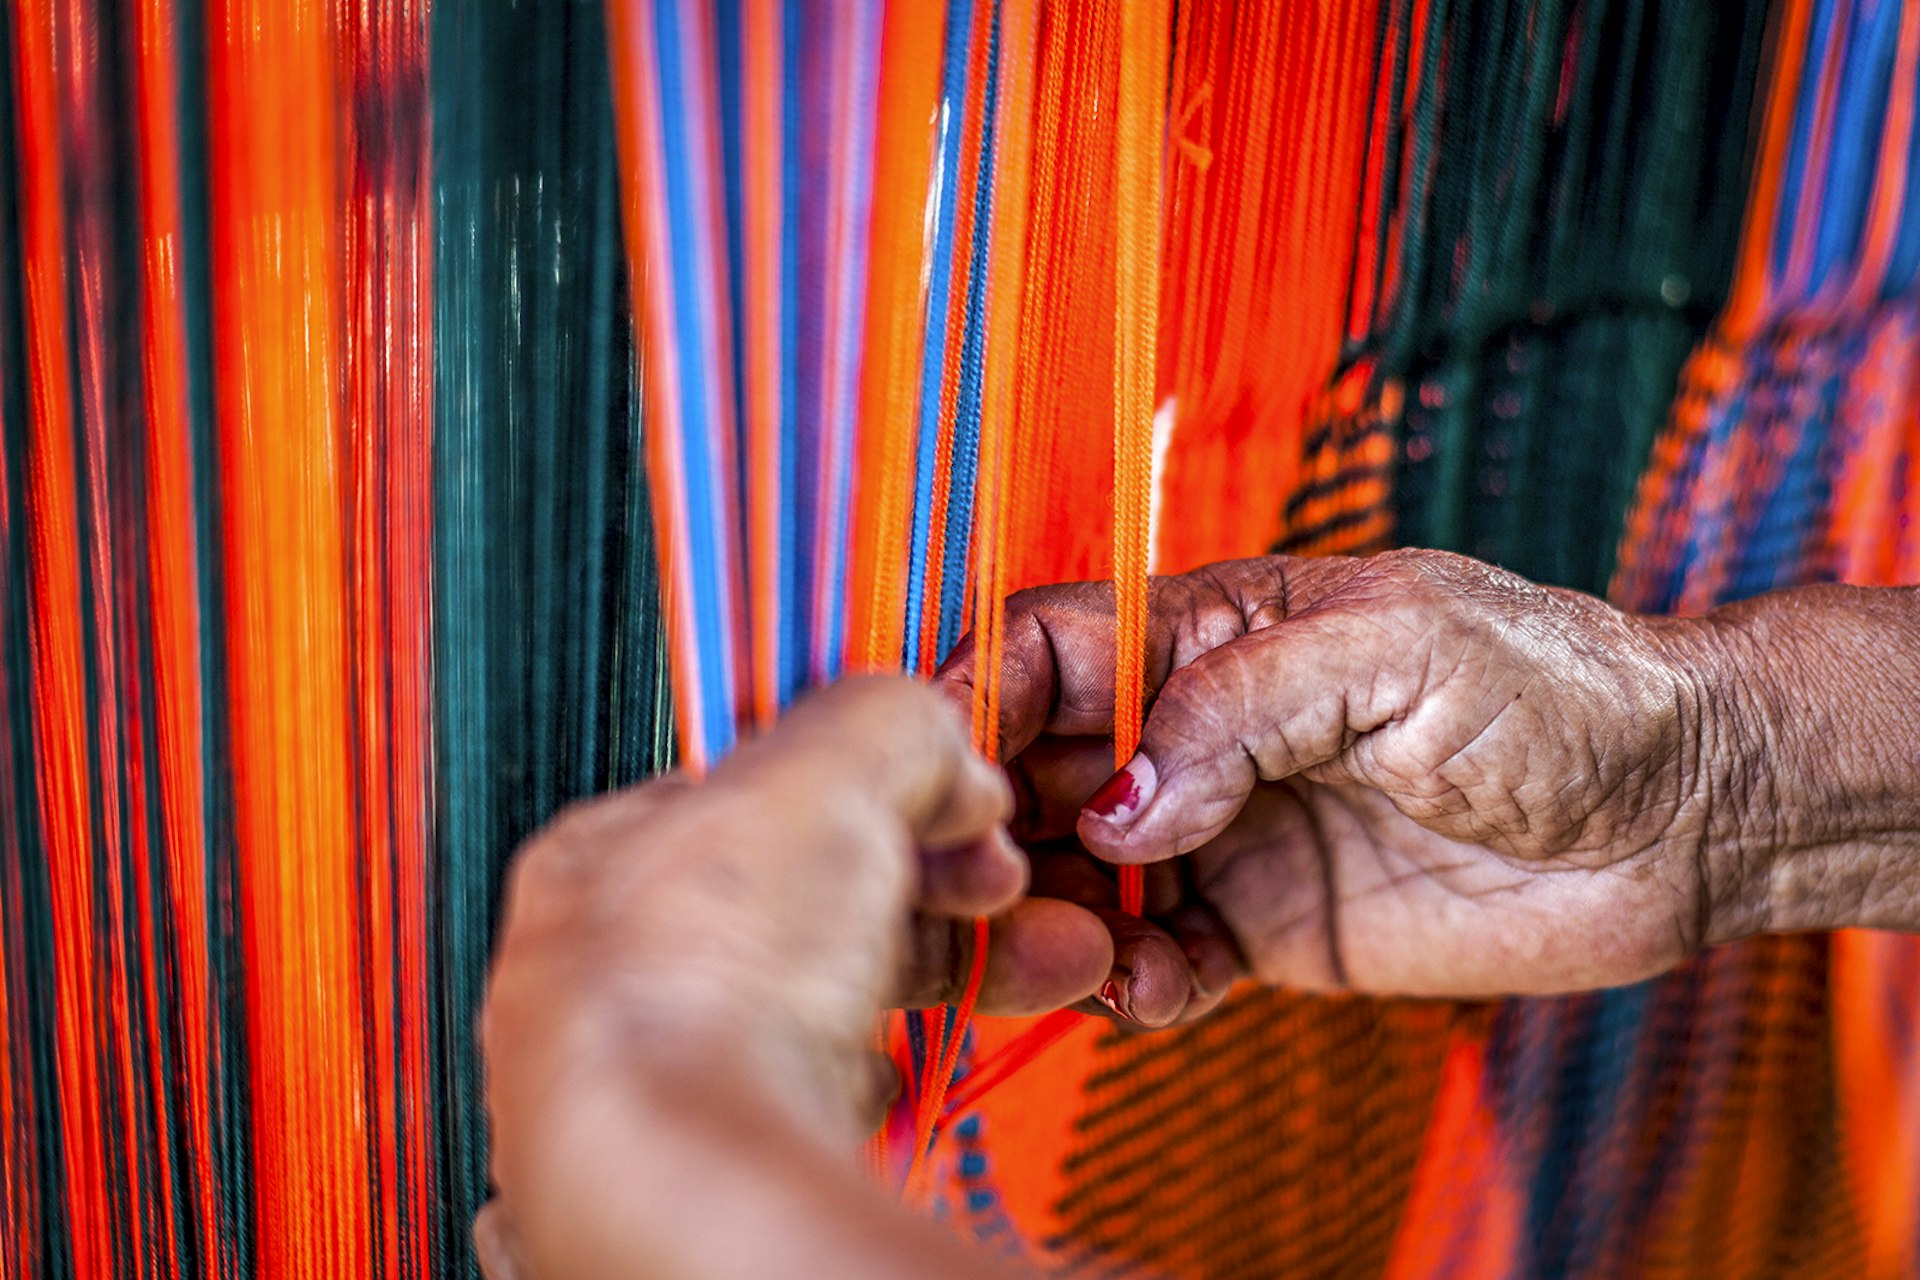 A woman weaves teal, orange, blue and purple stands to make a hammock in La Guajira, Colombia